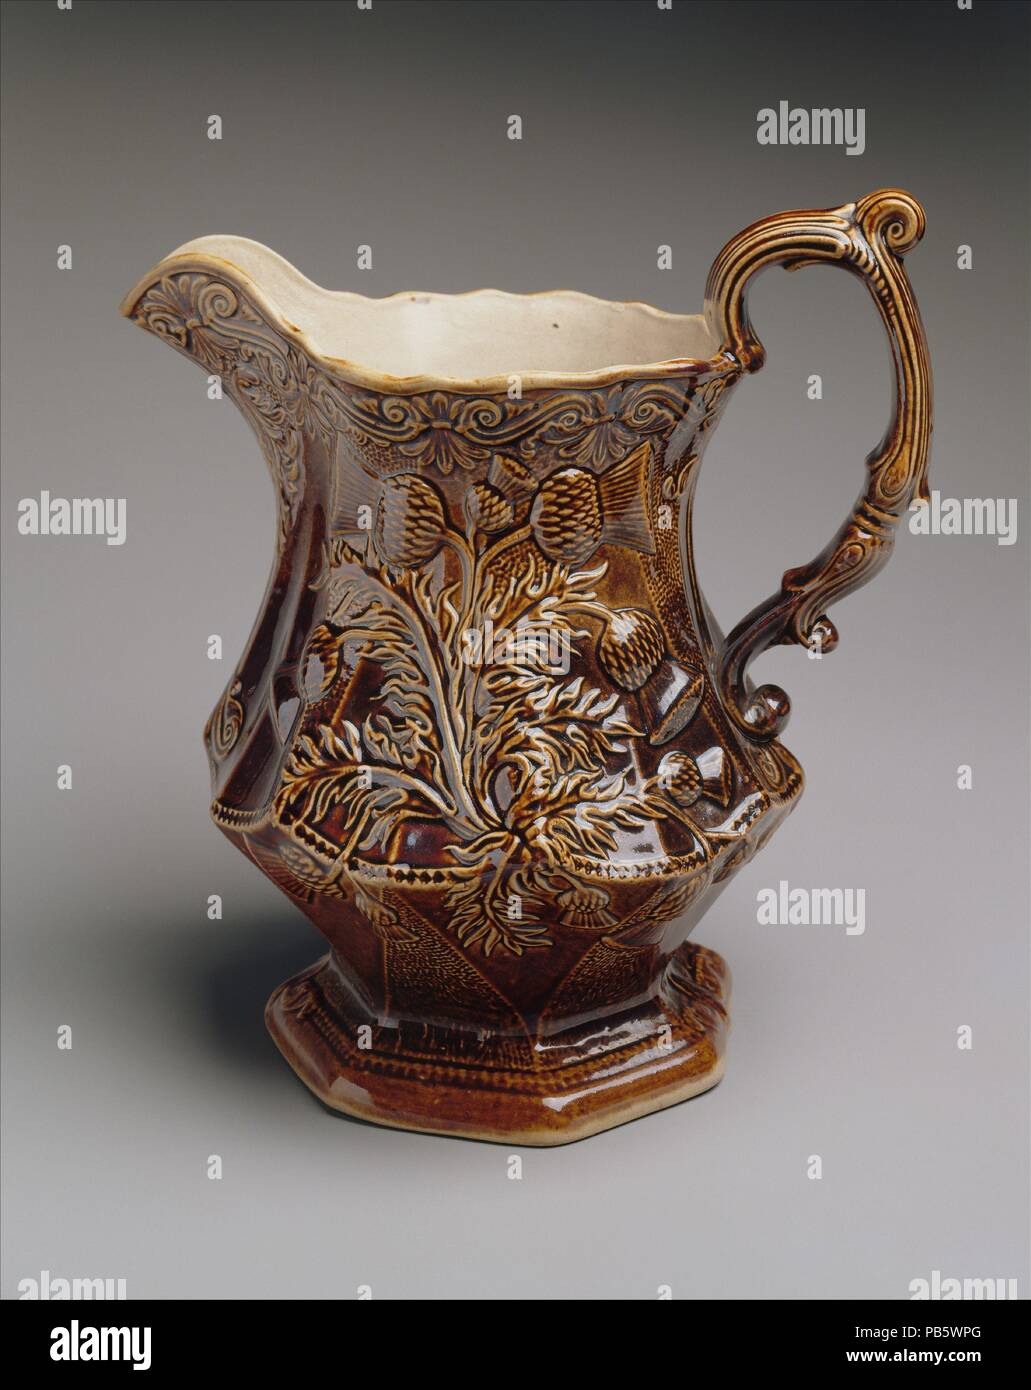 Pitcher. Culture: American. Dimensions: 9 5/8 x 9 1/8 x 7 in. (24.4 x 23.2 x 17.8 cm). Manufacturer: American Pottery Manufacturing Company (1833-ca. 1854). Date: 1833-50.  In 1828 two Scotsmen David and James Henderson took over the defunct Jersey Porcelain and Earthenware Company in Jersey City, New Jersey, to fabricate fine stonewares that resembled those made in England. Such mid-range wares were imported into America in large quantities. The Jersey City factory relied heavily on English workers, designs and factory practices.  Many of the firm's products, pitchers, in particular, virtuall Stock Photo